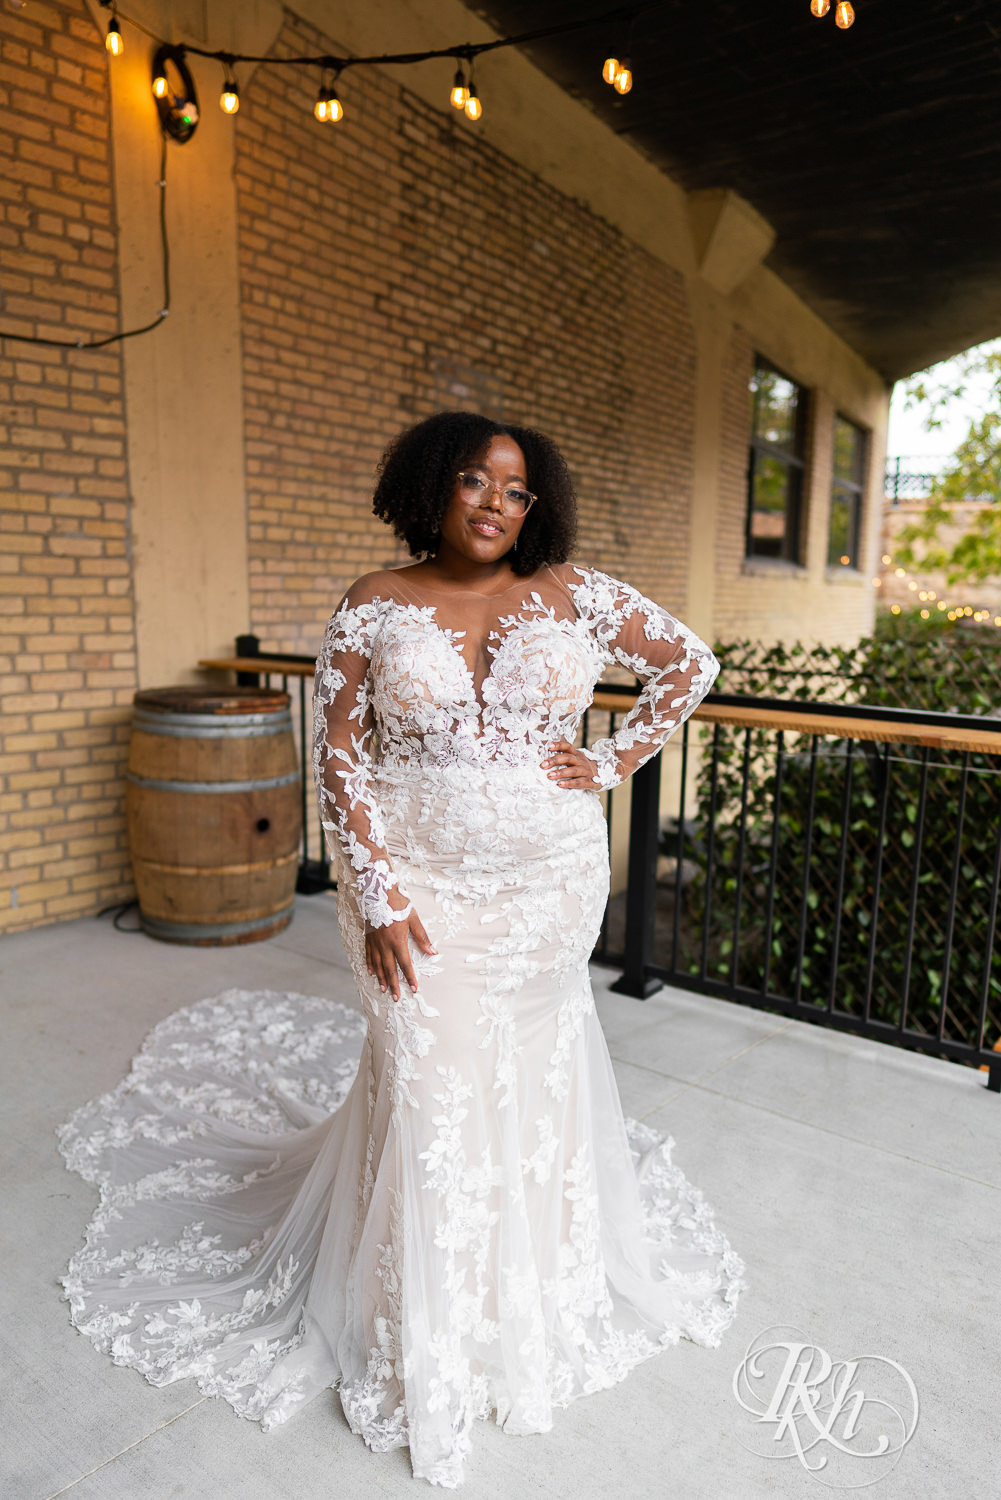 Black plus size bride in glasses smiling in wedding dresses in Minneapolis, Minnesota with hand on hip.